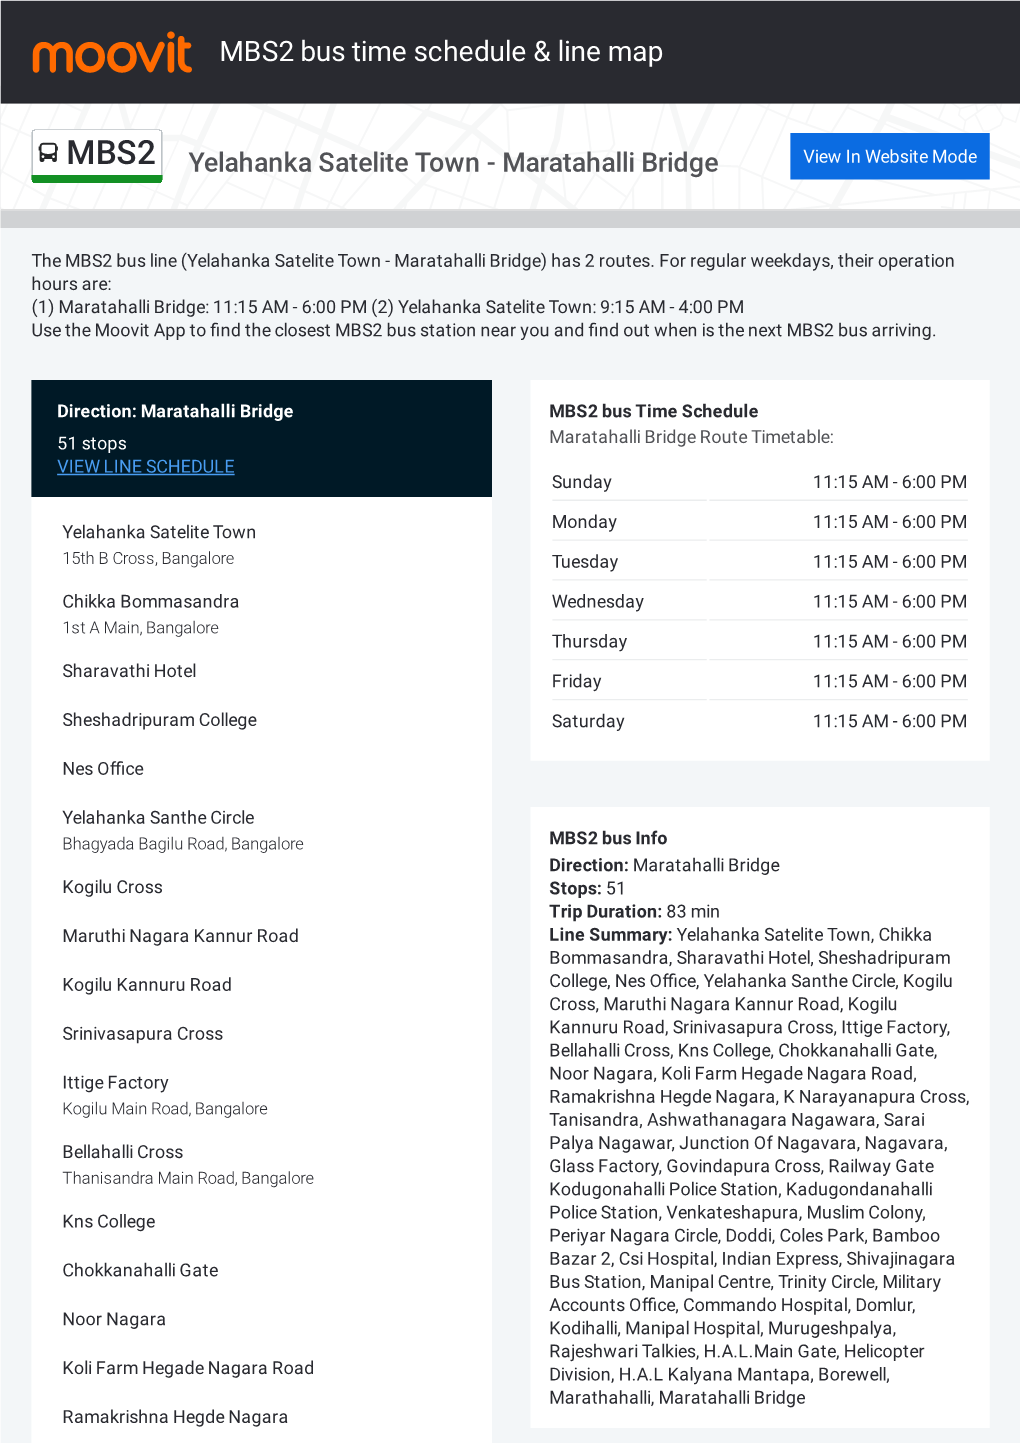 MBS2 Bus Time Schedule & Line Route